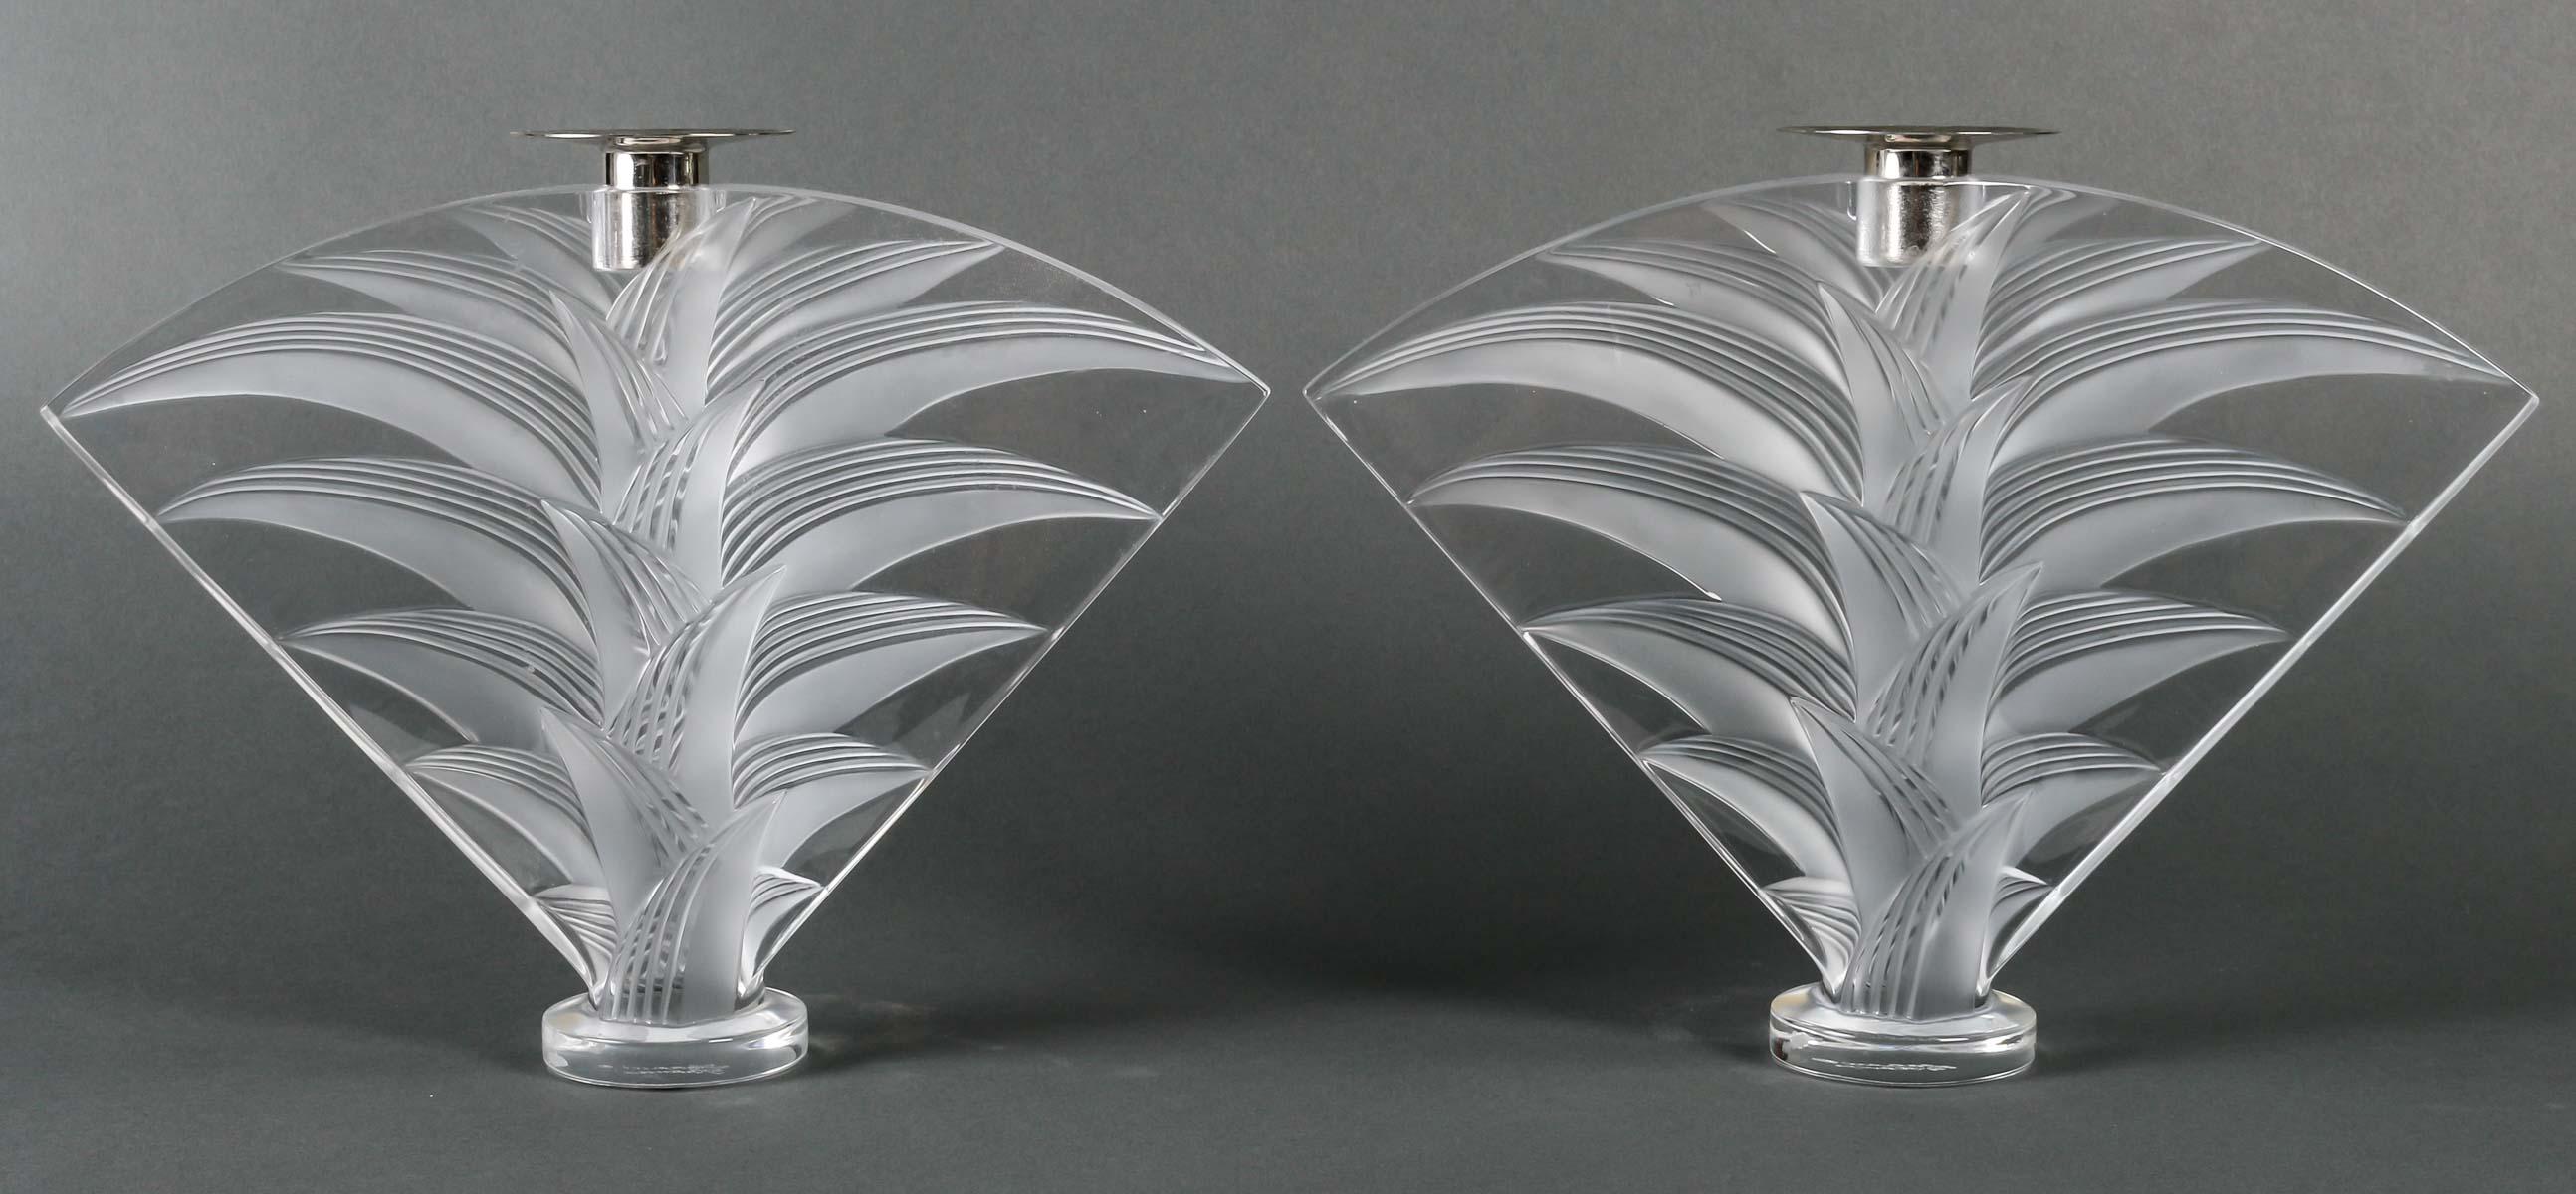 Pair of Lalique Crystal Candlesticks, 20th Century. For Sale 4